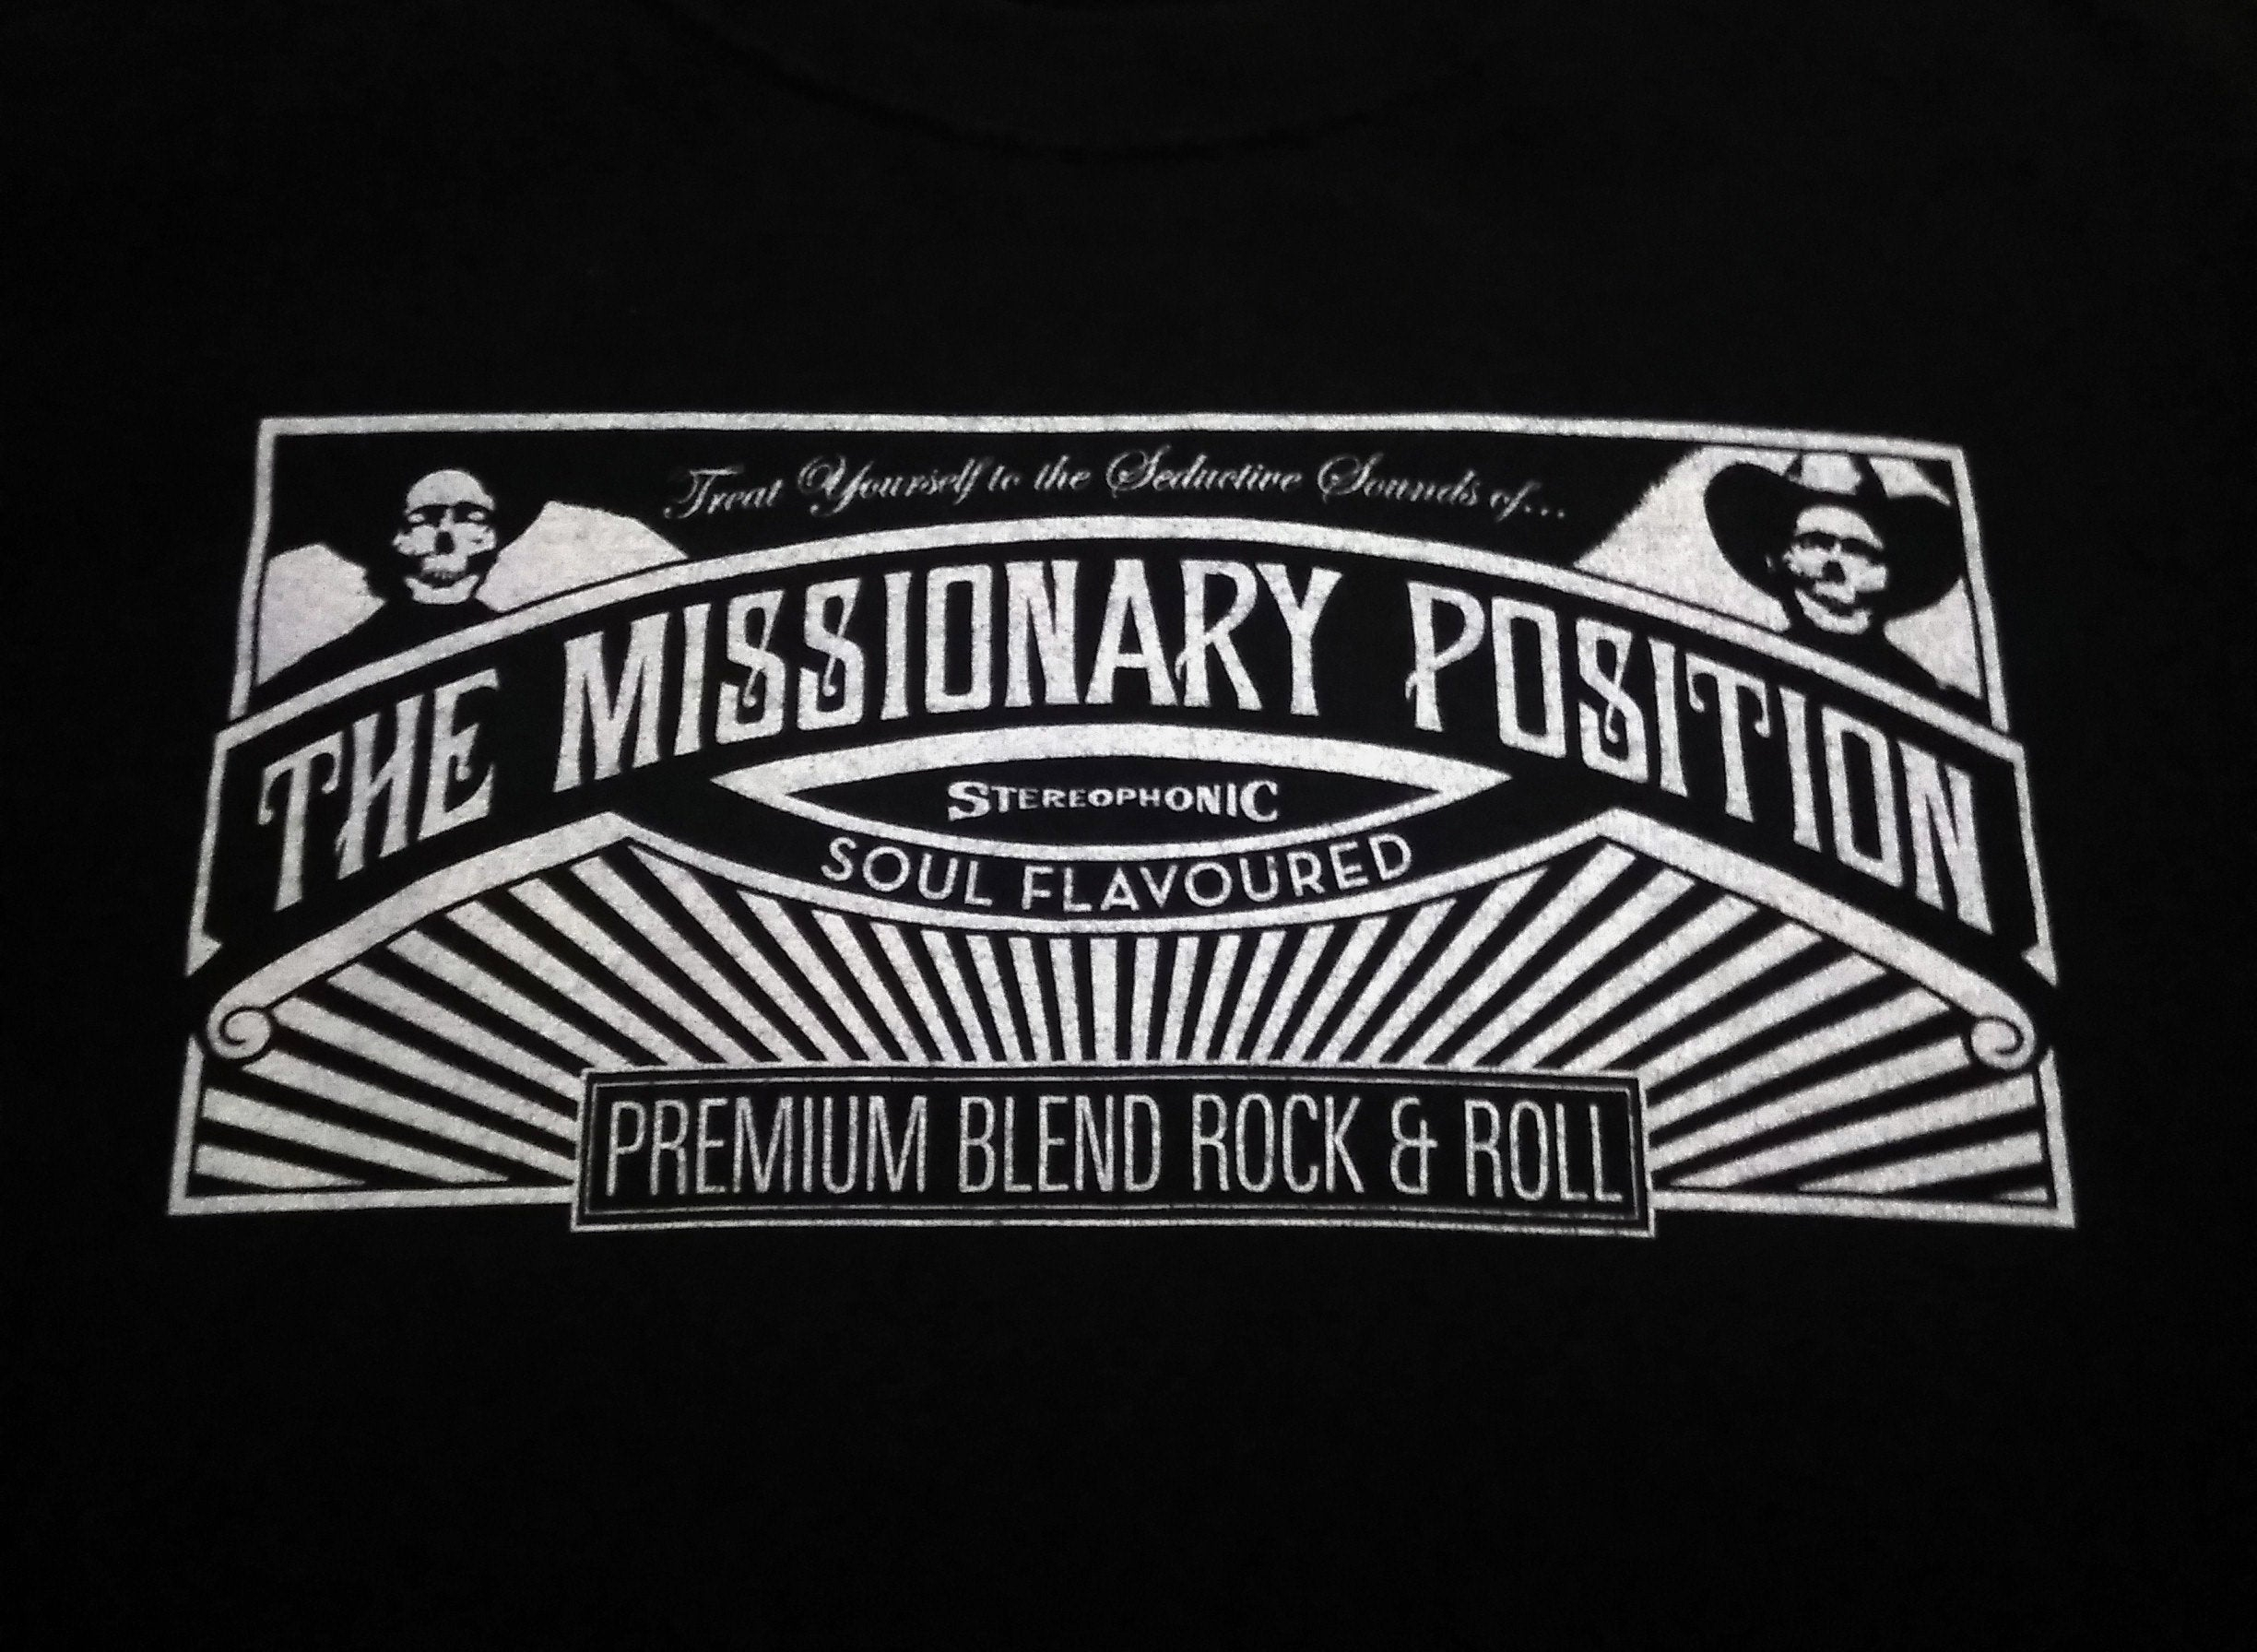 Missionary Position Diagram Rare The Missionary Position Unisex Black Short Sleeve Graphic T Shirt Jeff Angell Benjamin Anderson Rock Roll Hard Rock Blues Funk